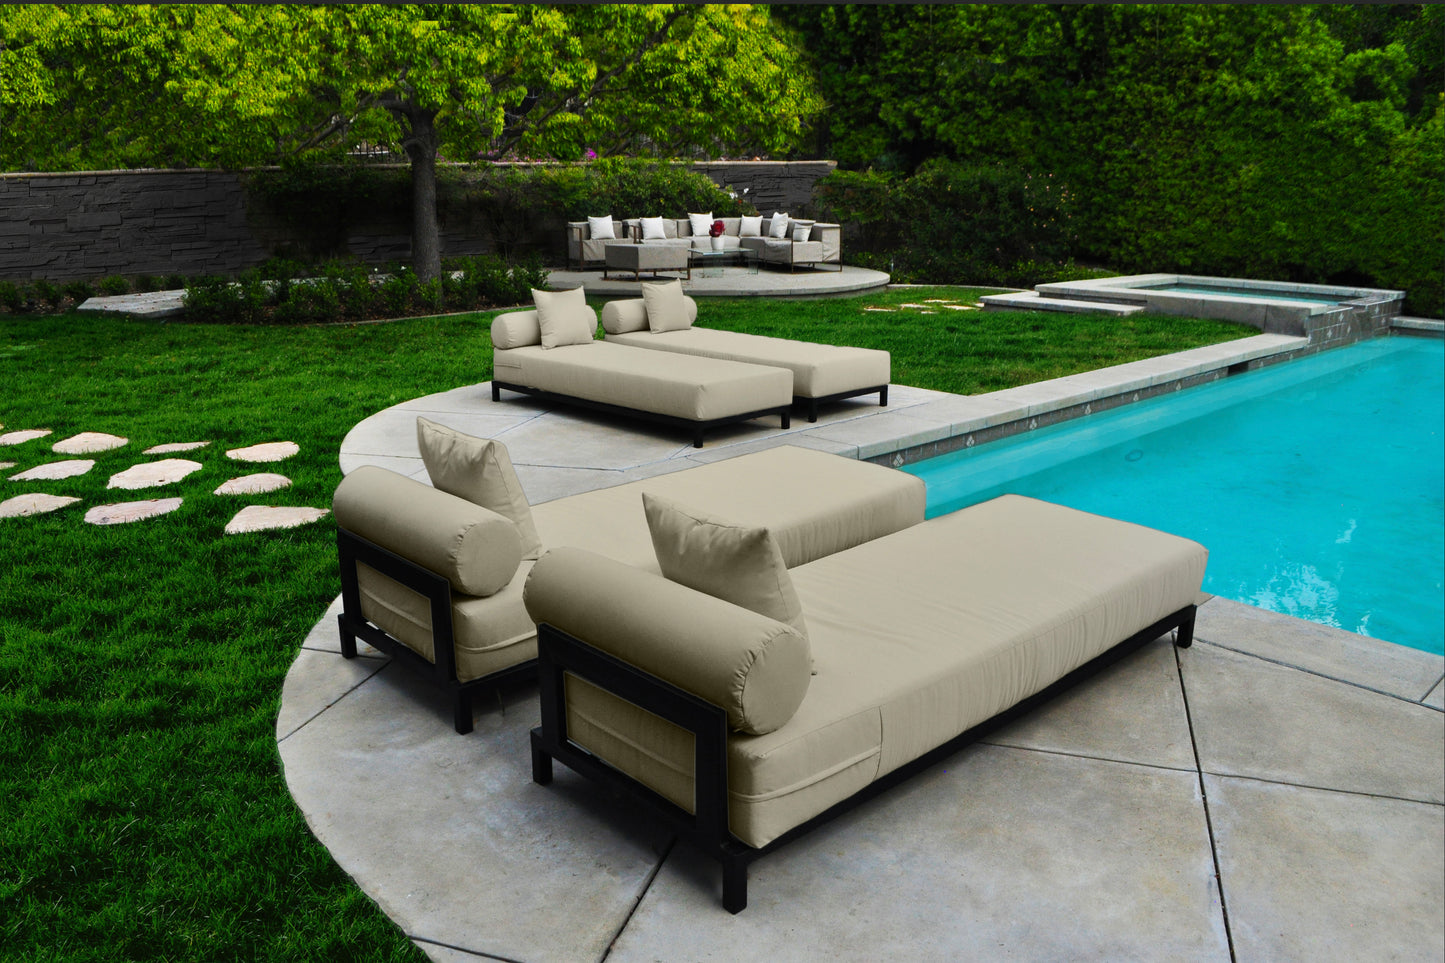 Volantes Outdoor Beige Chaise Lounger